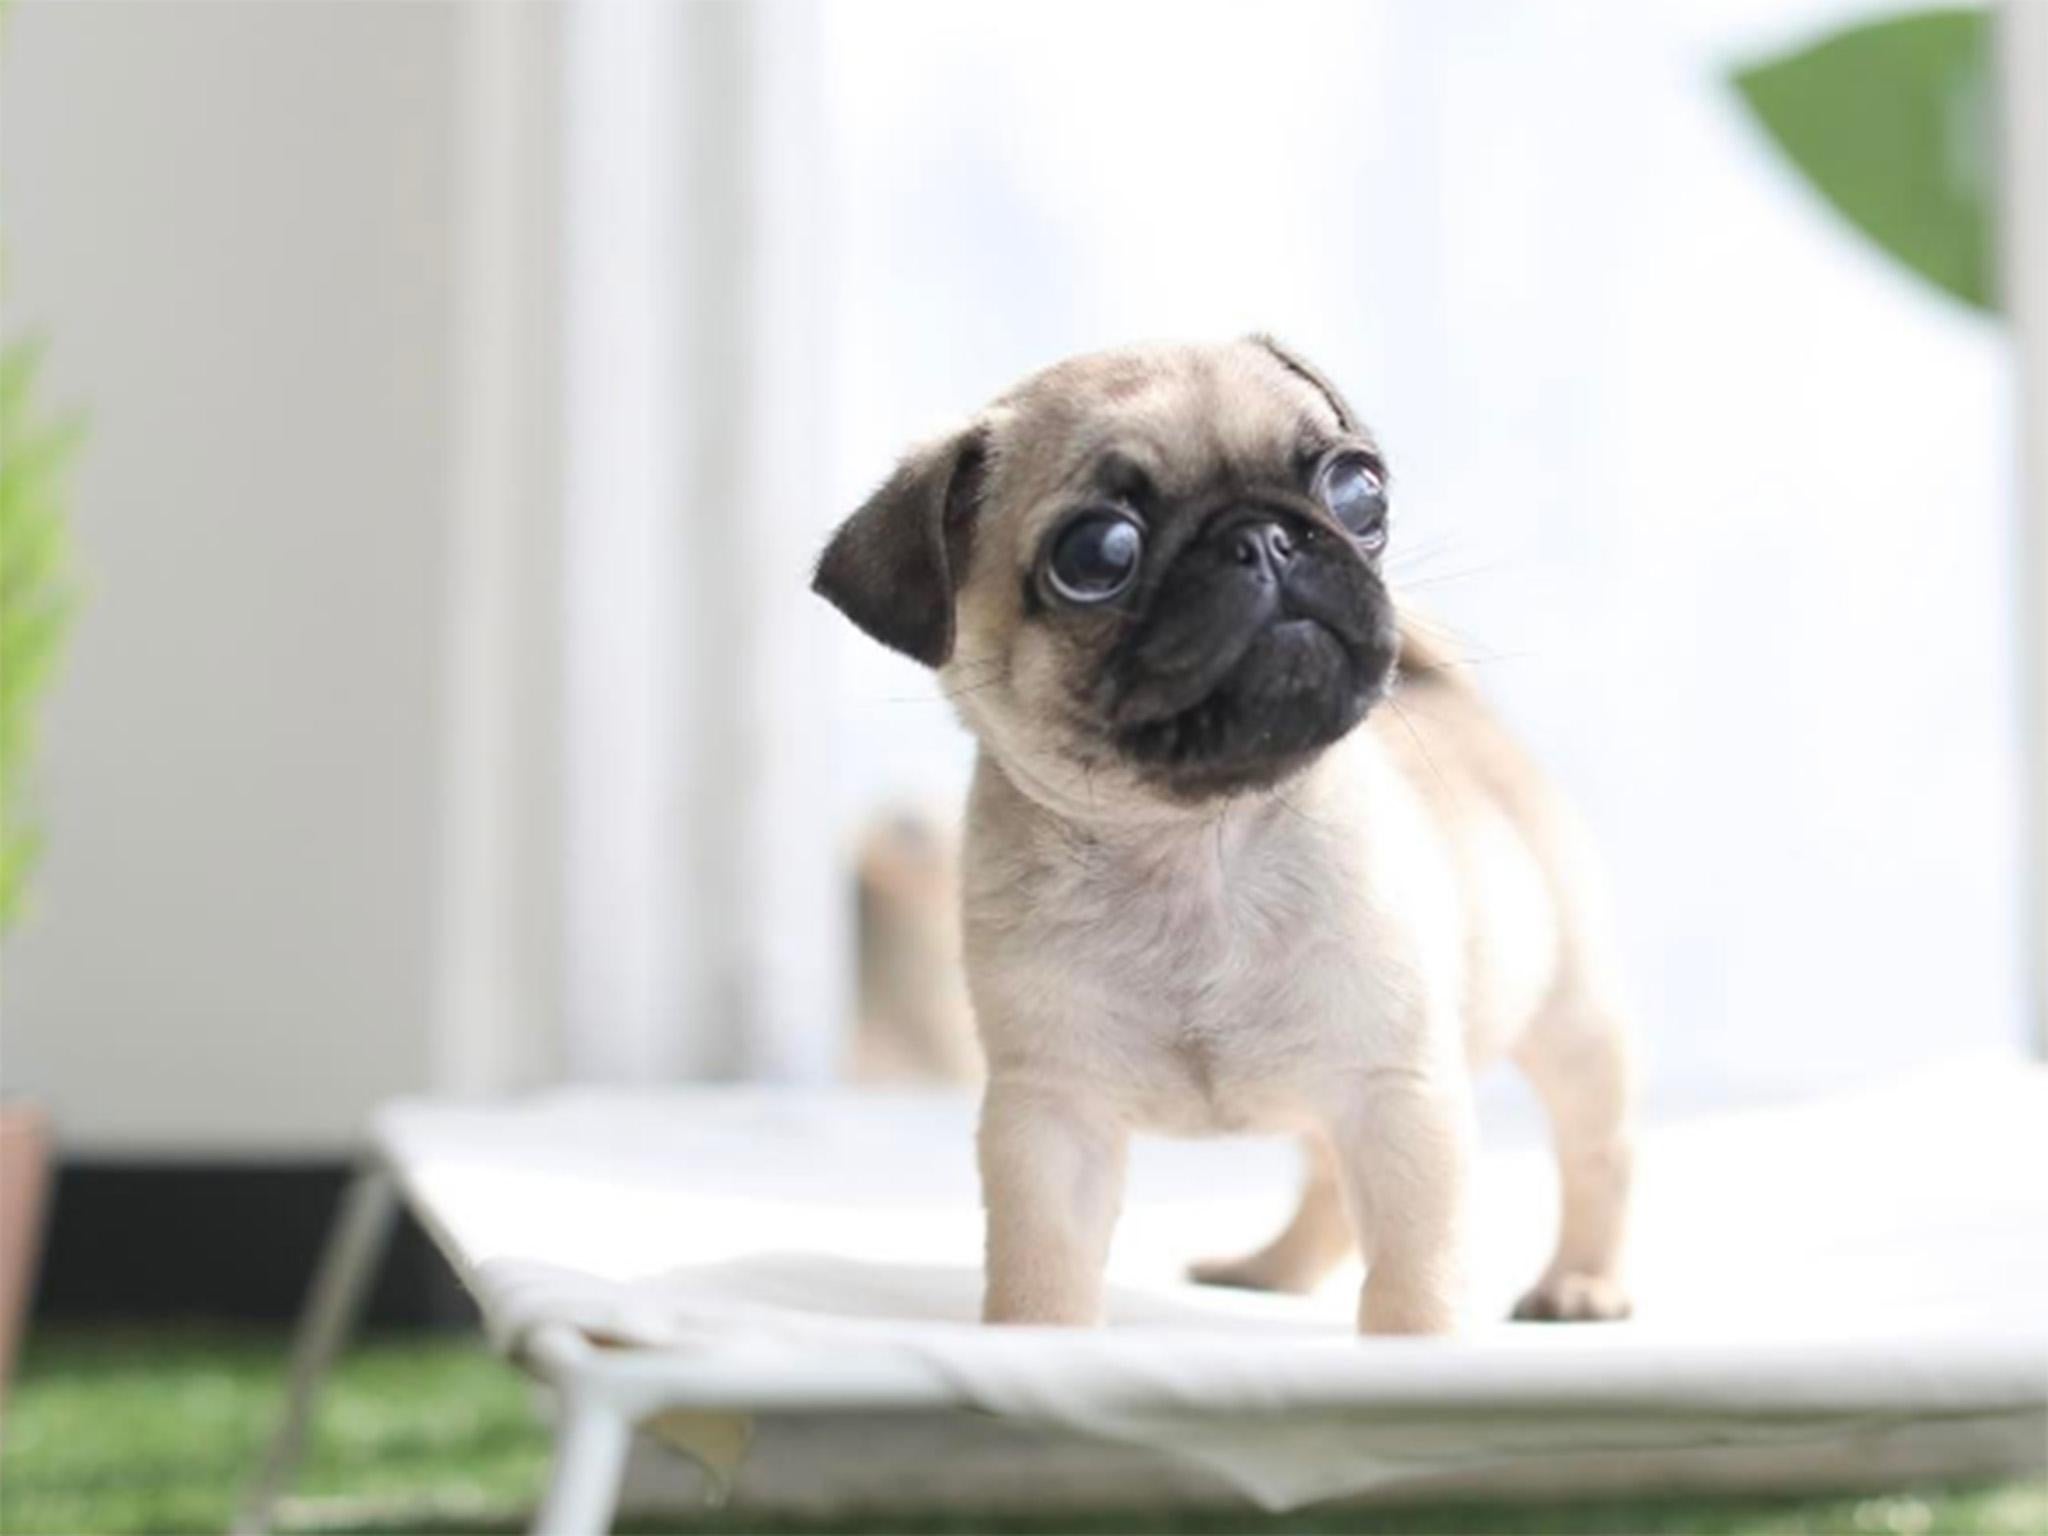 Puppy welfare groups warn breeding miniature pets could lead to a number of health issues including congenital defects and respiratory problems